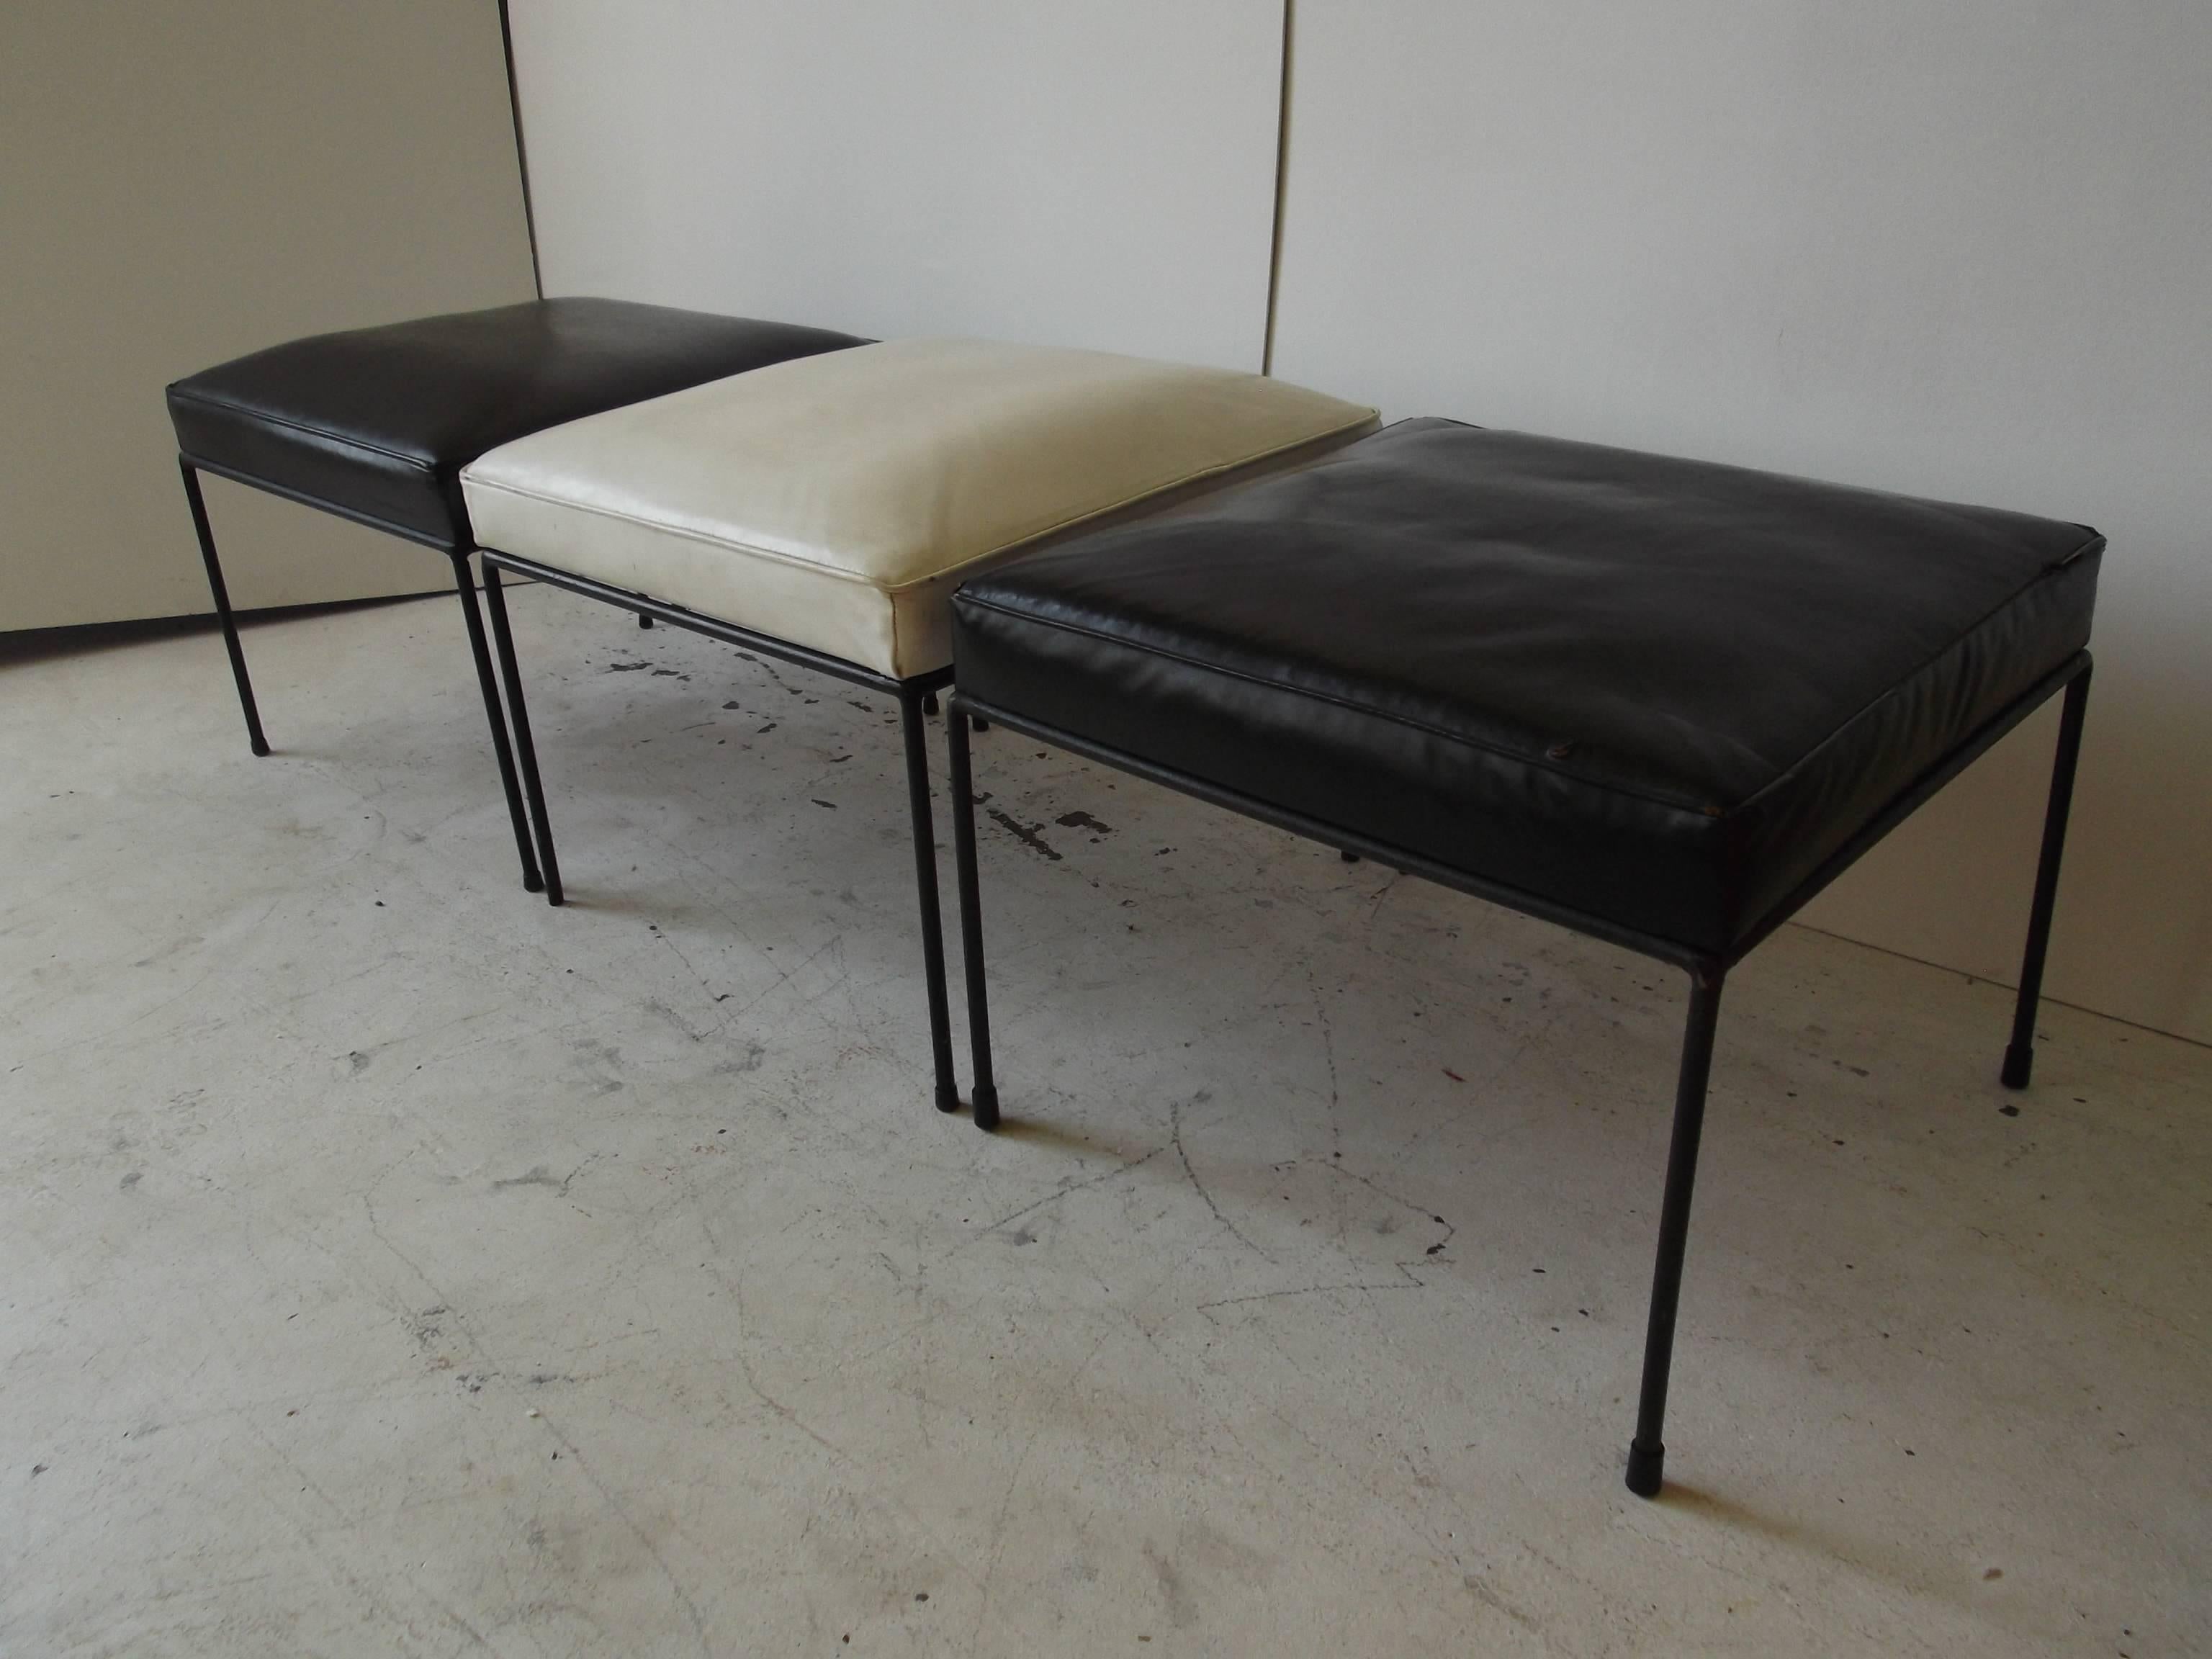 This is a set of three original Paul McCobb Iron stools with vinyl seating surfaces. They are a set that has always been together. One black is a little more shiny than the other, and shows wear to edges. These are vintage from the 1950s.